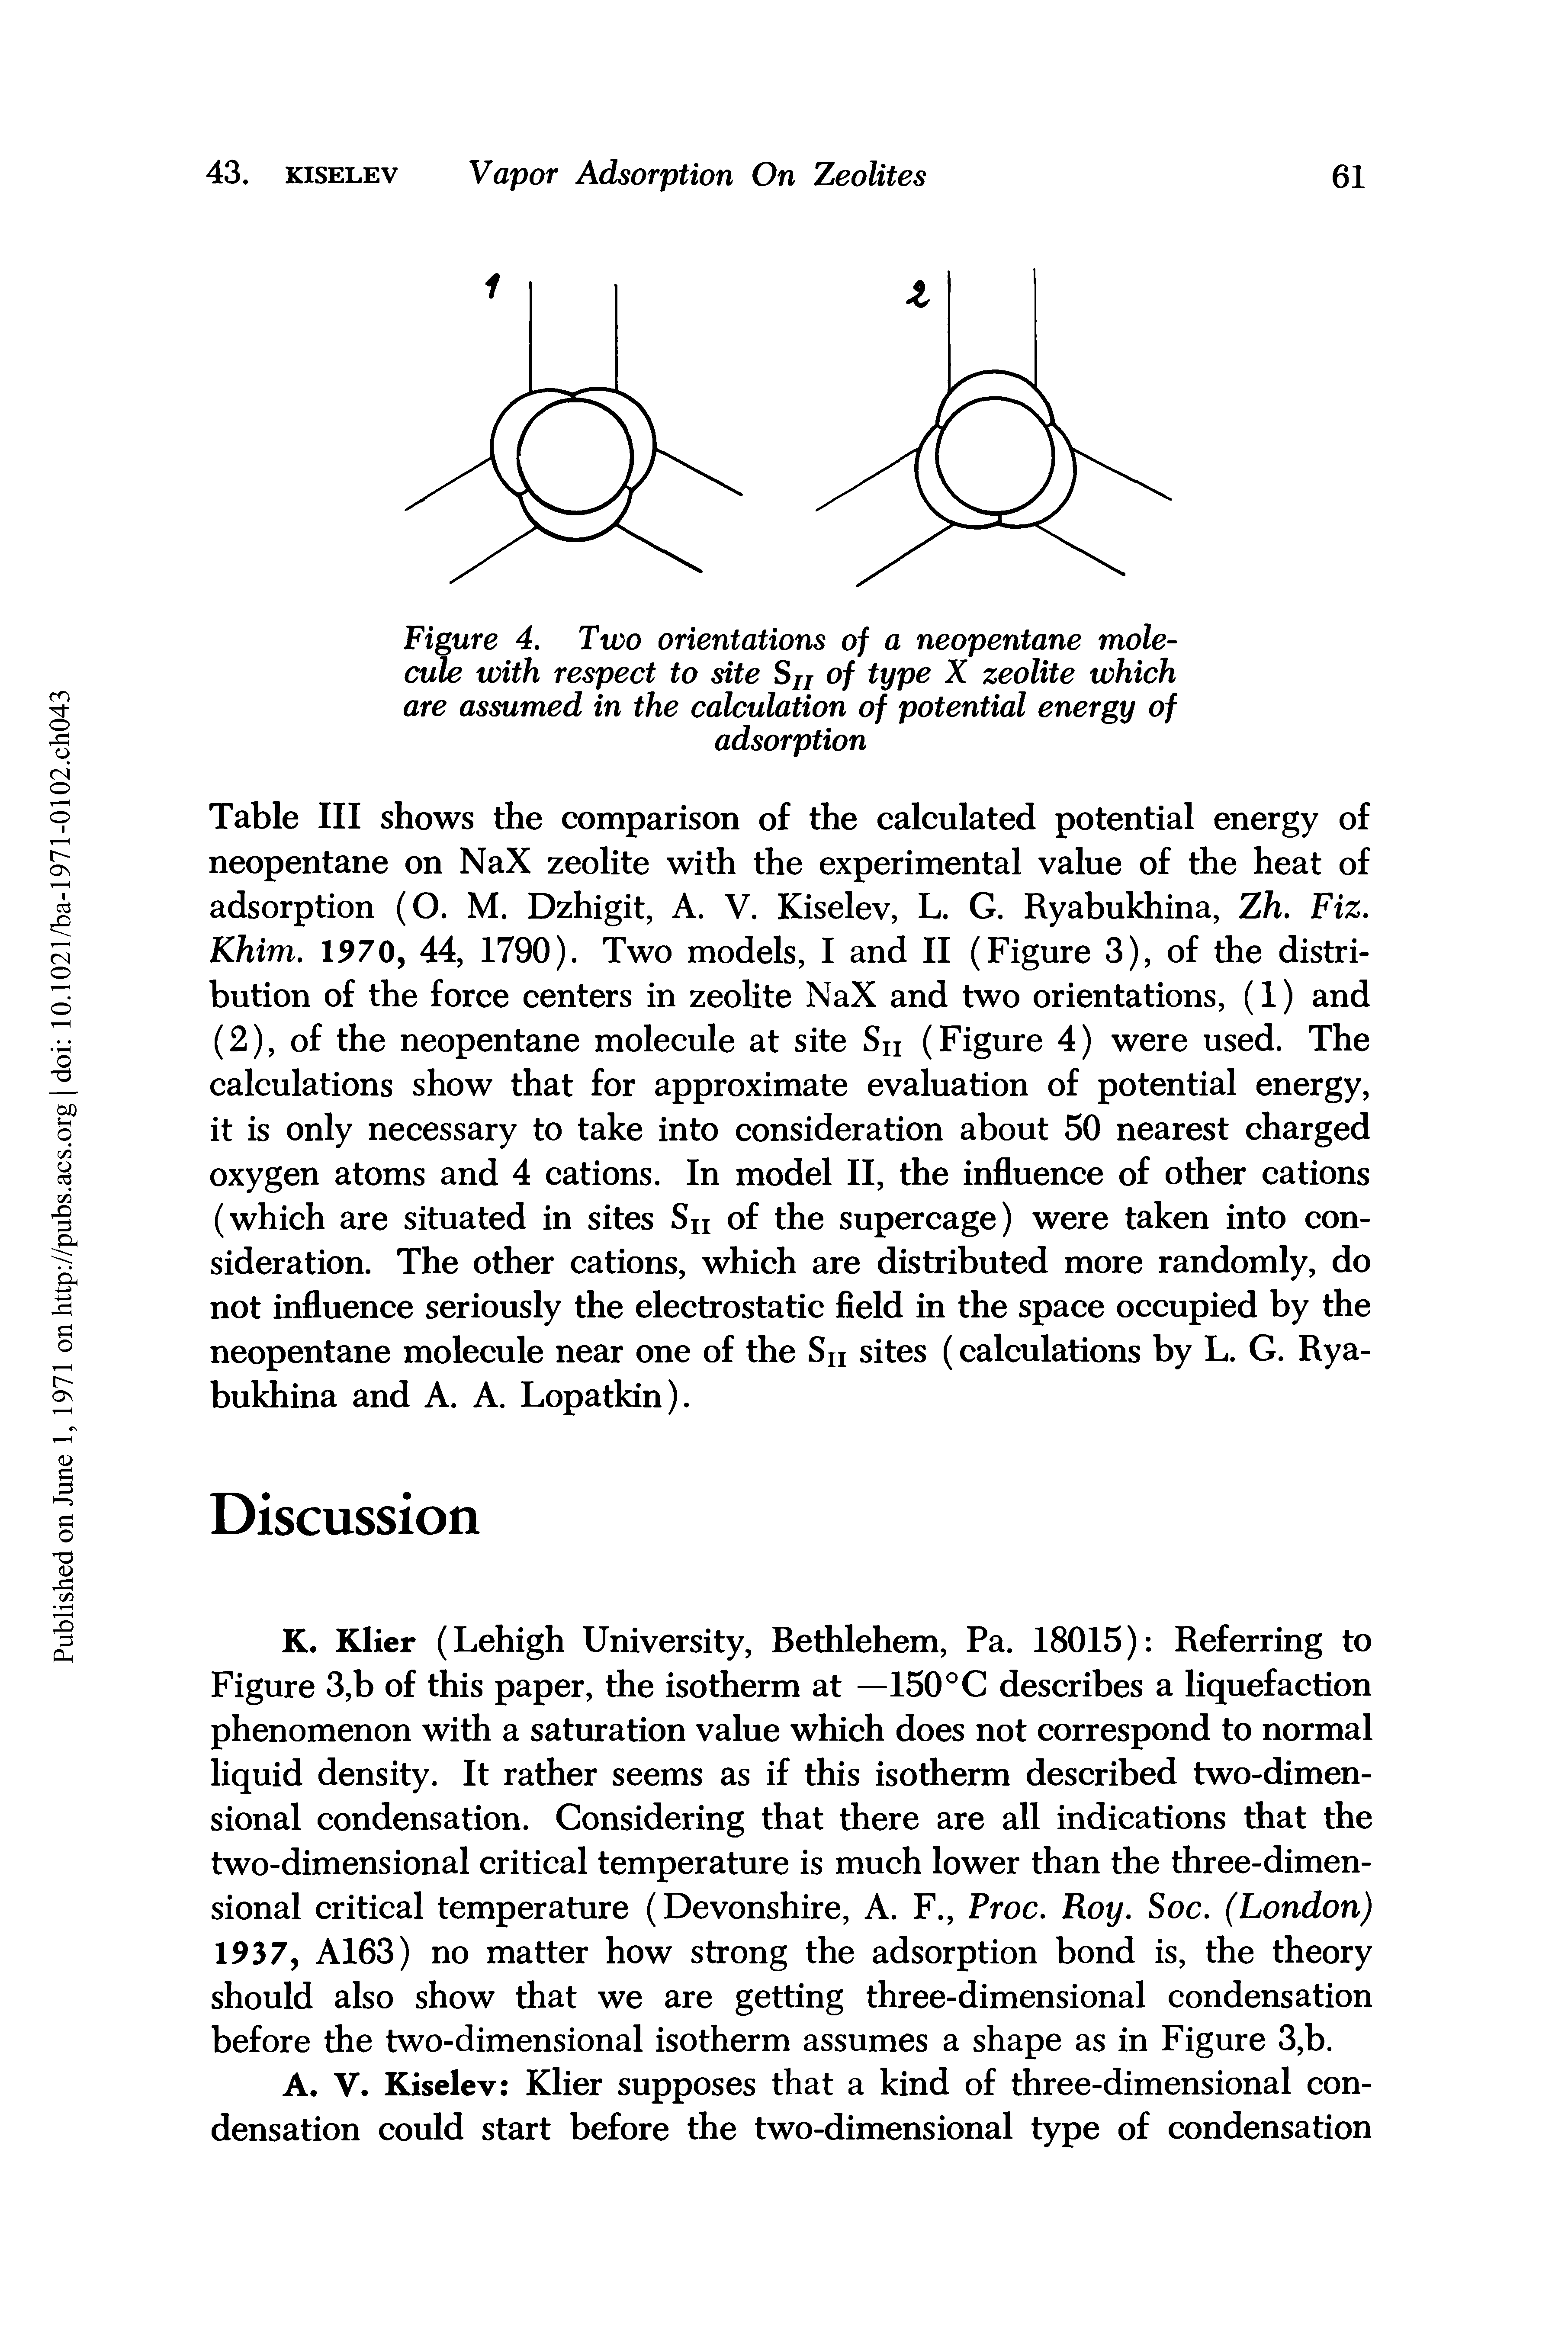 Figure 4. Two orientations of a neopentane molecule with respect to site Sjj of type X zeolite which are assumed in the calculation of potential energy of adsorption...